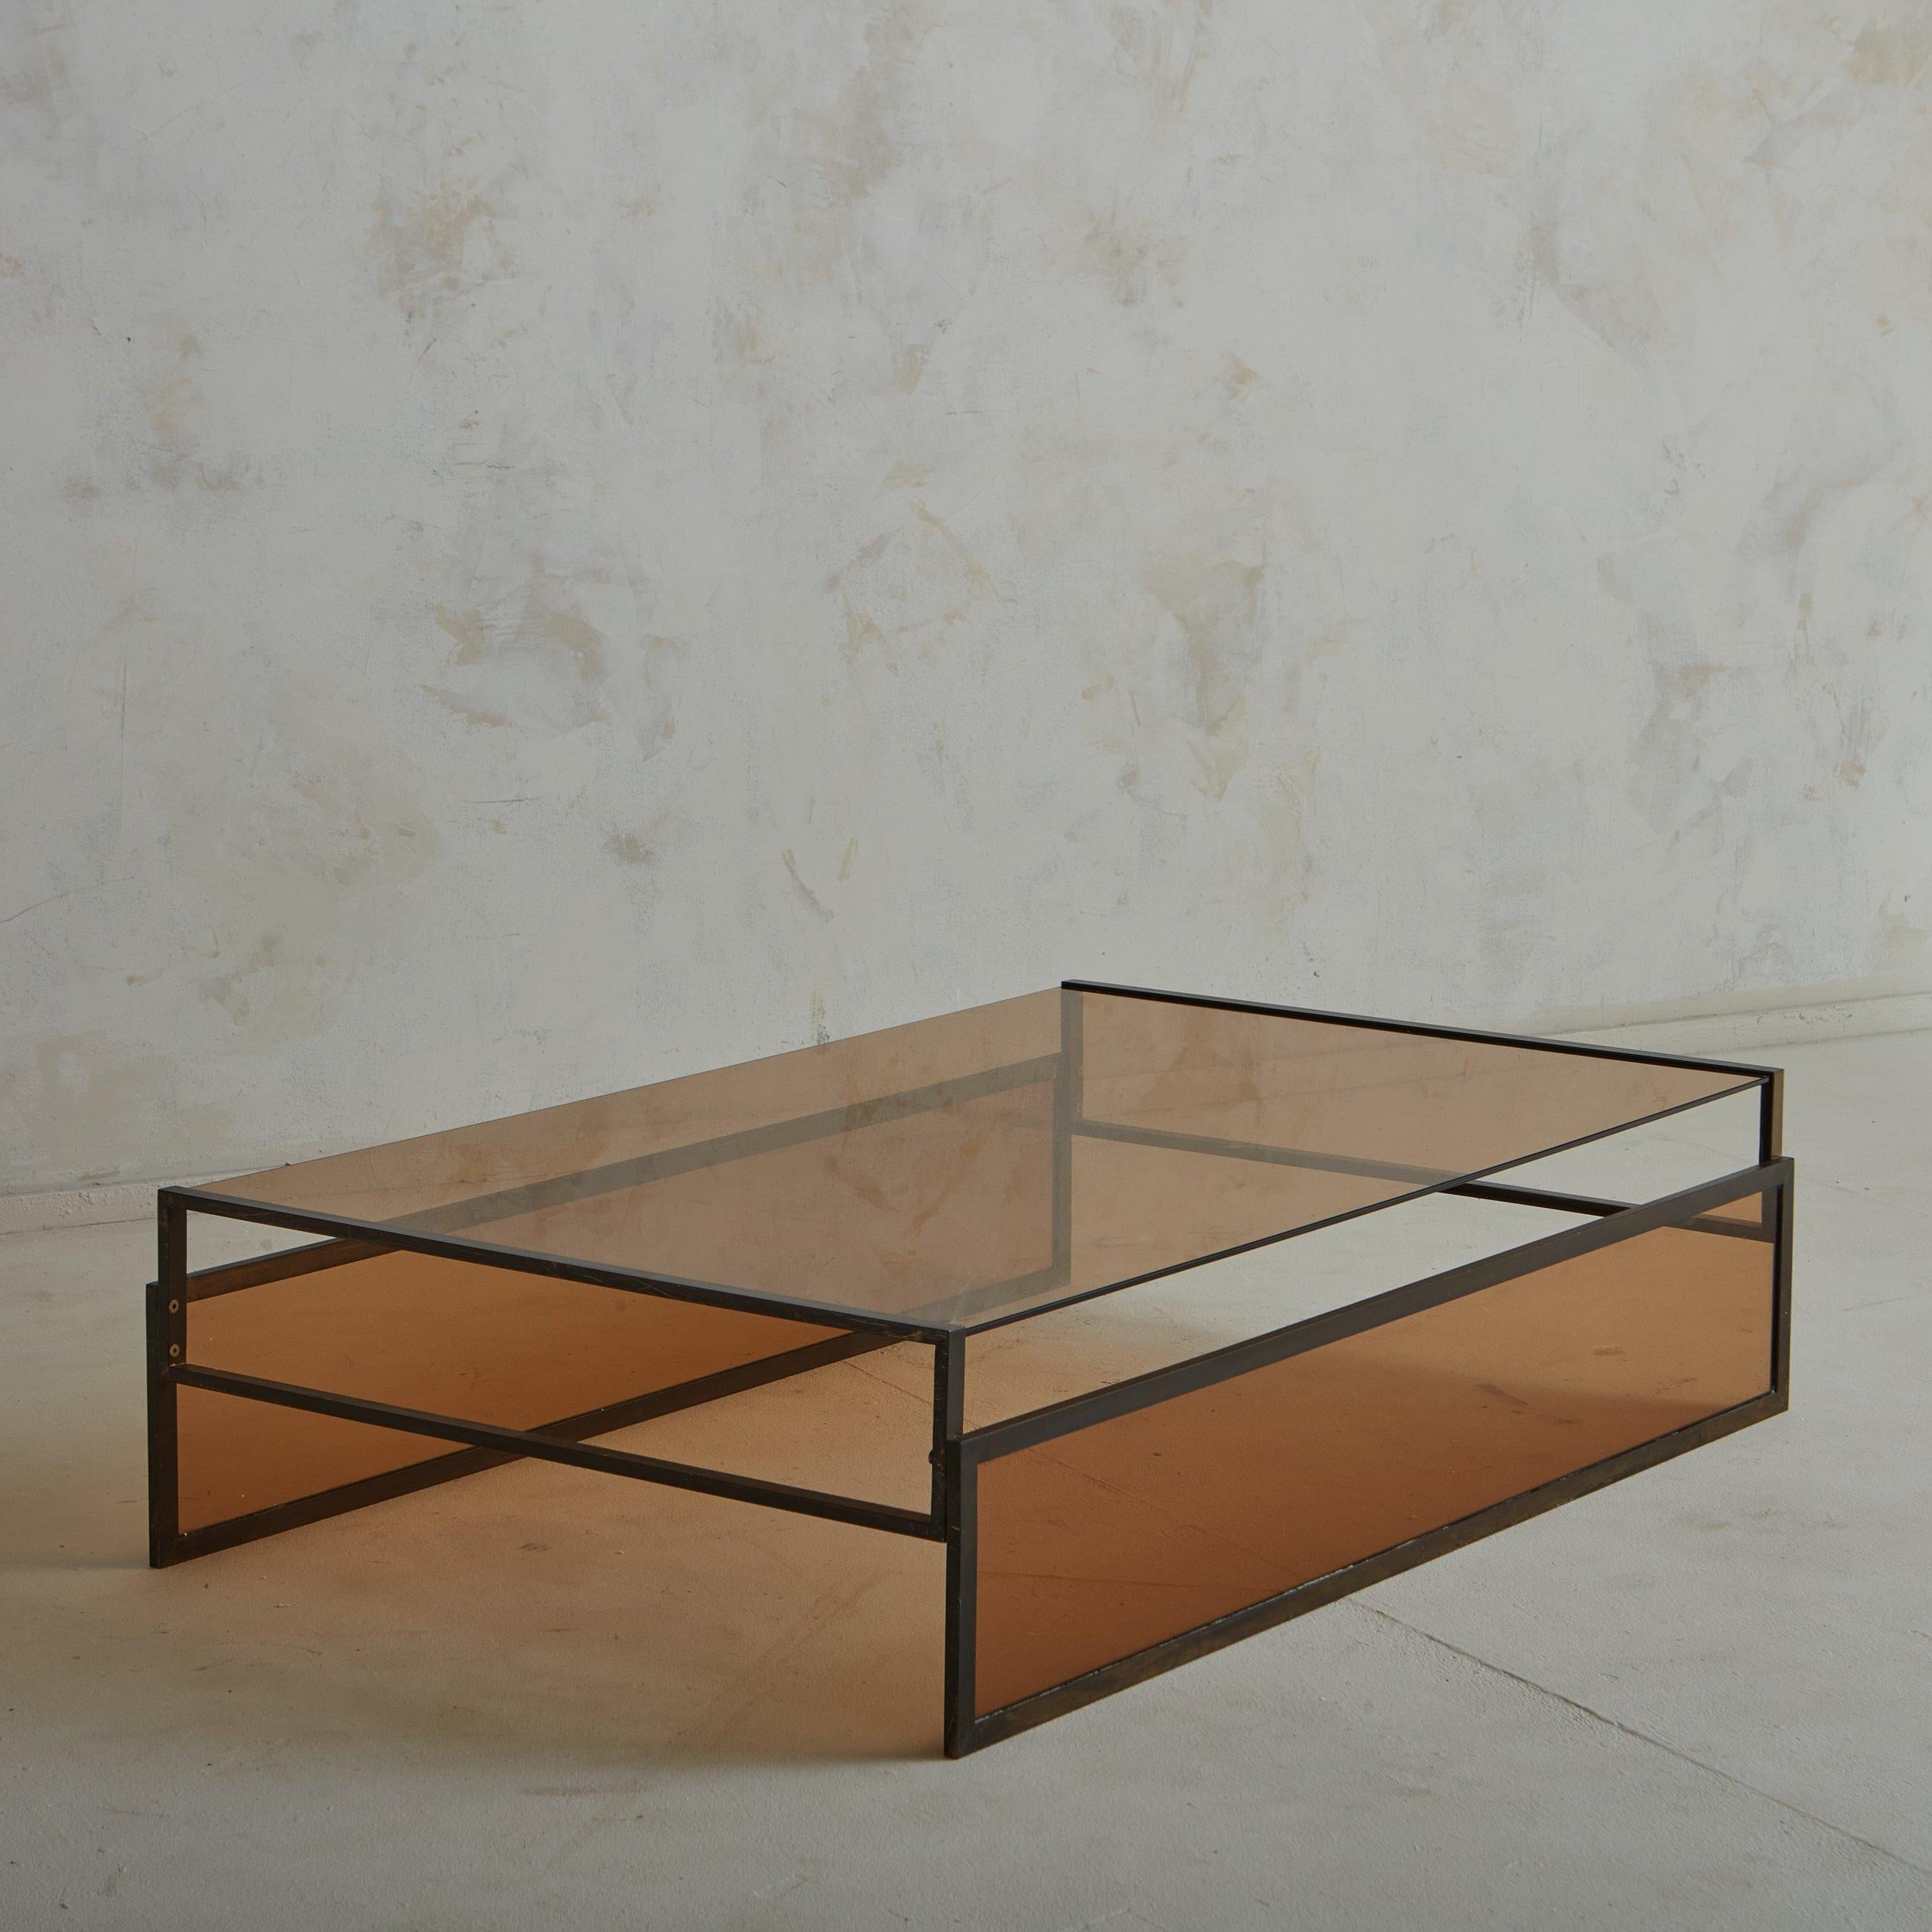 A vintage French coffee table featuring a rectangular patinated iron block frame with an inset amber glass tabletop. Matching amber glass pieces partially line two sides of the table, which emphasize the angular lines and highlight the table’s